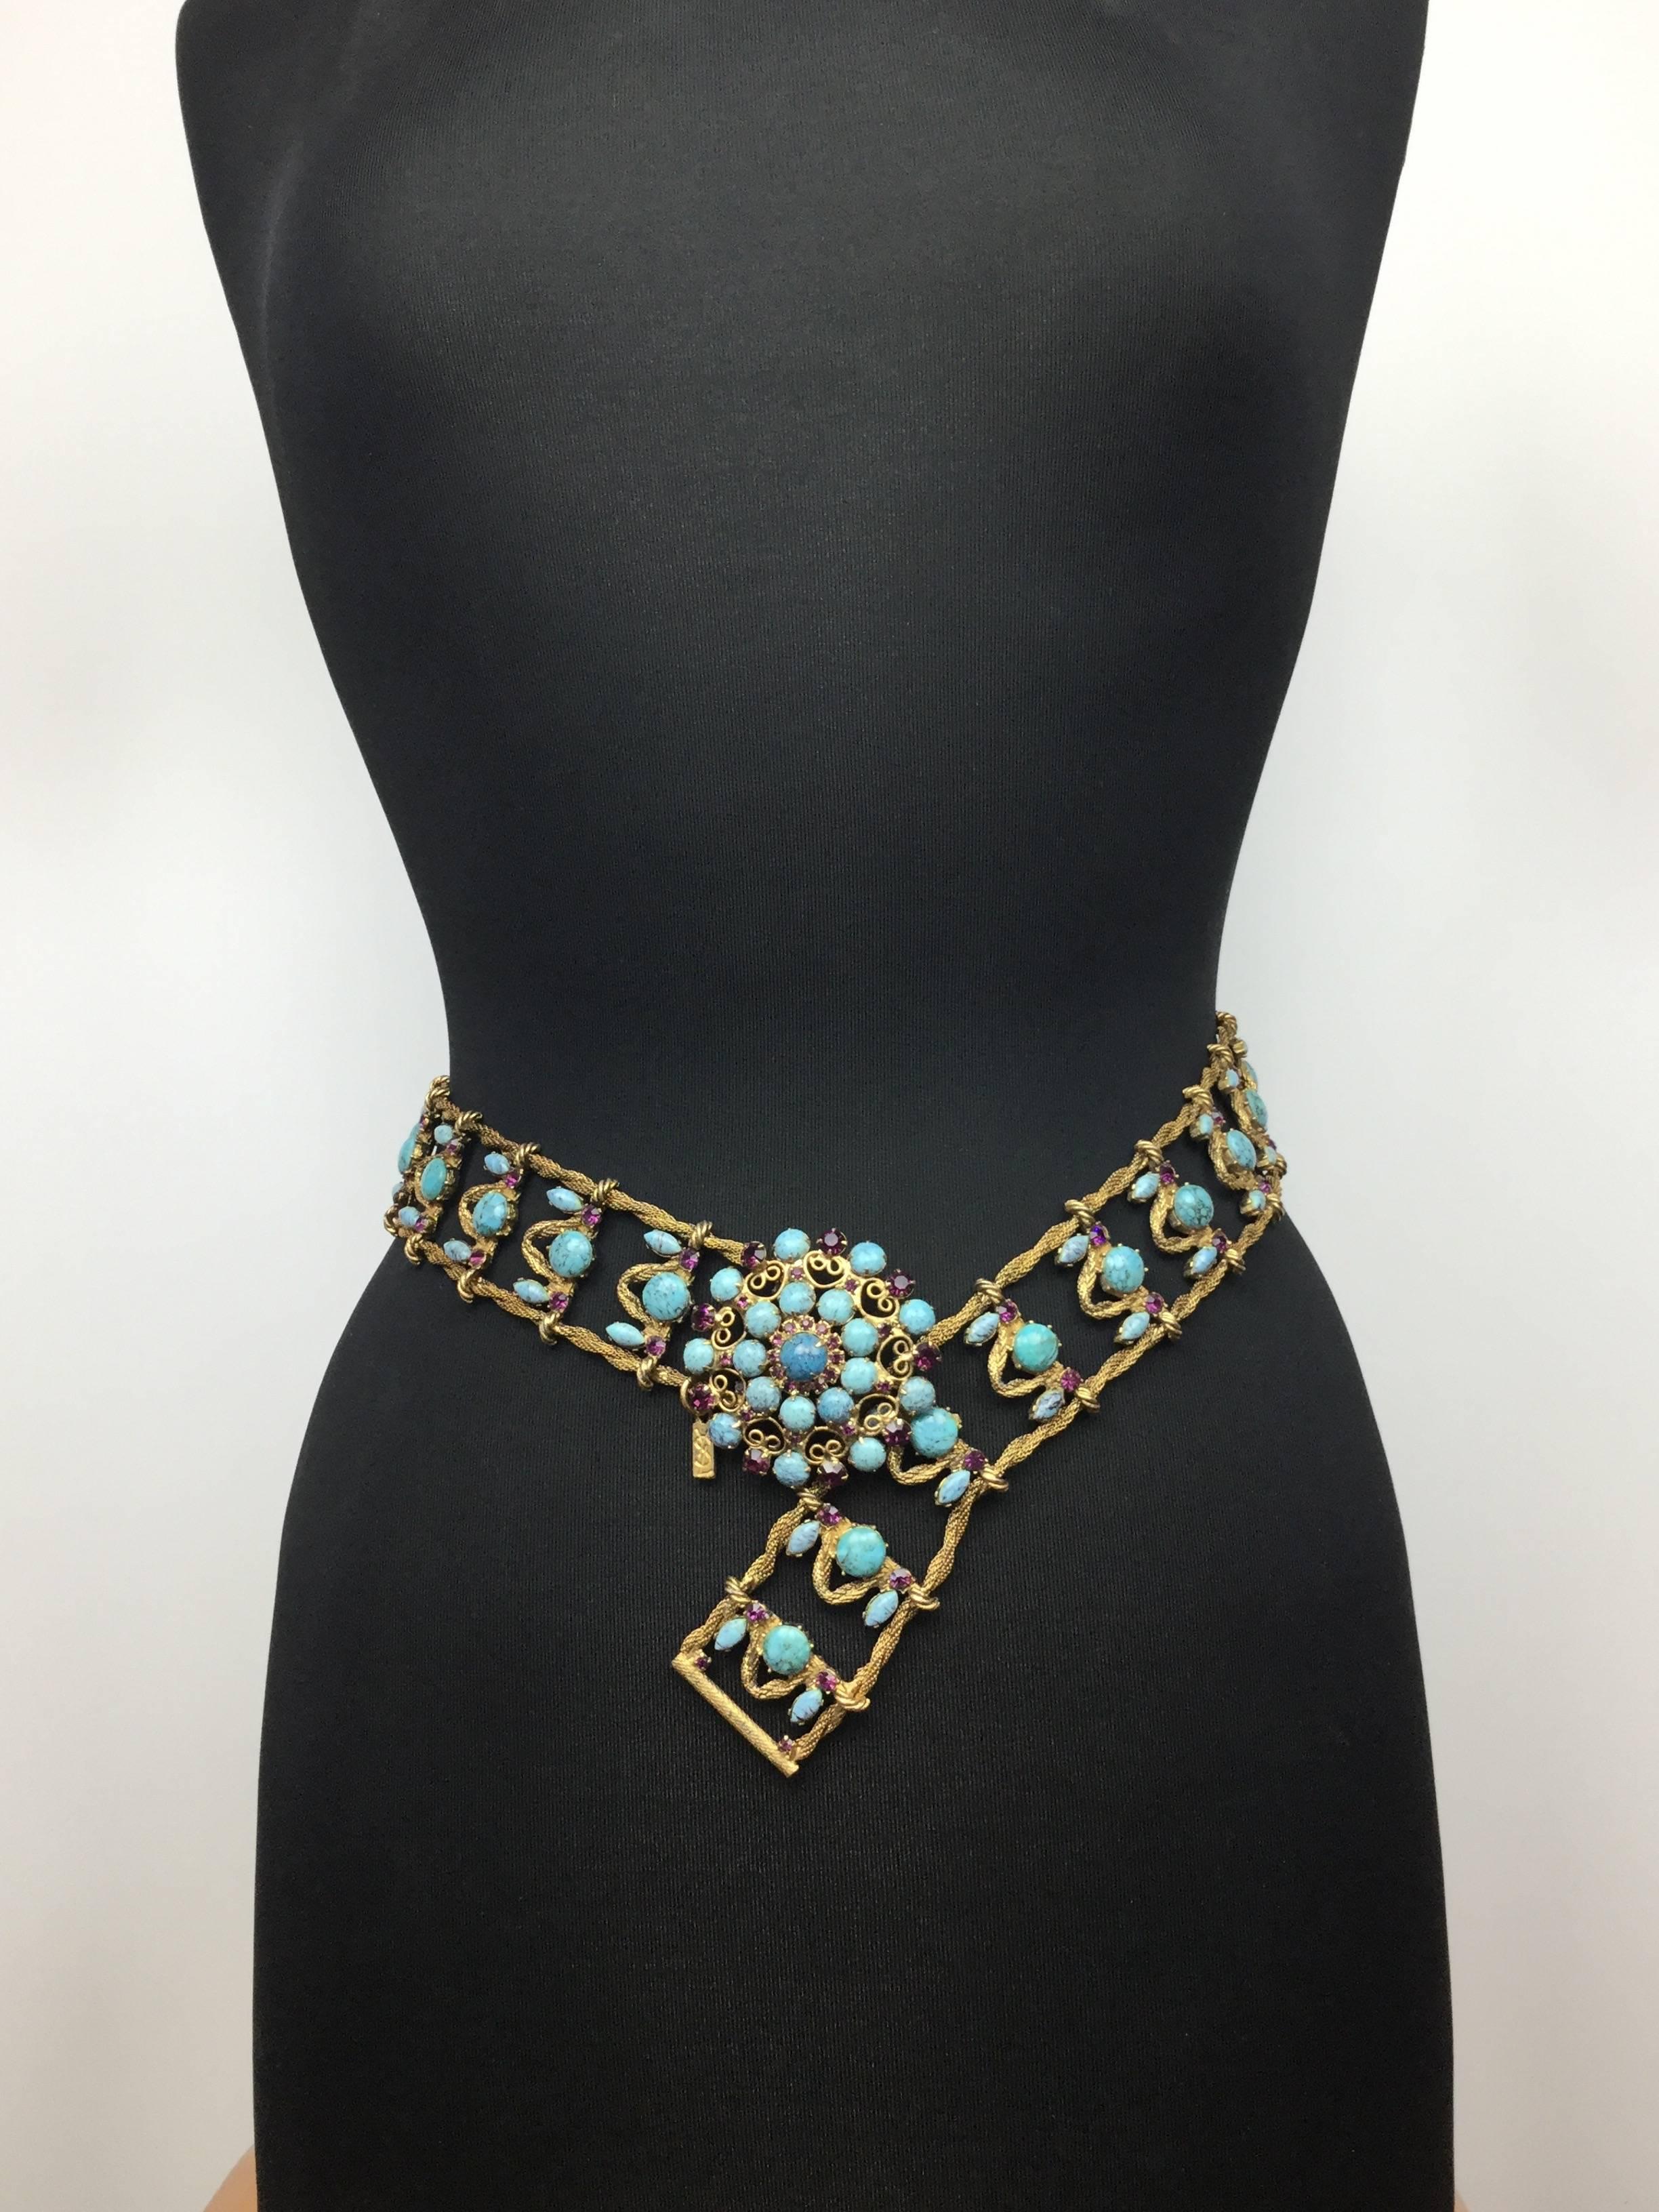 Incredible Yves Saint Laurent Metal Belt with Faux Turquoise Cabochons. 1970's. 2